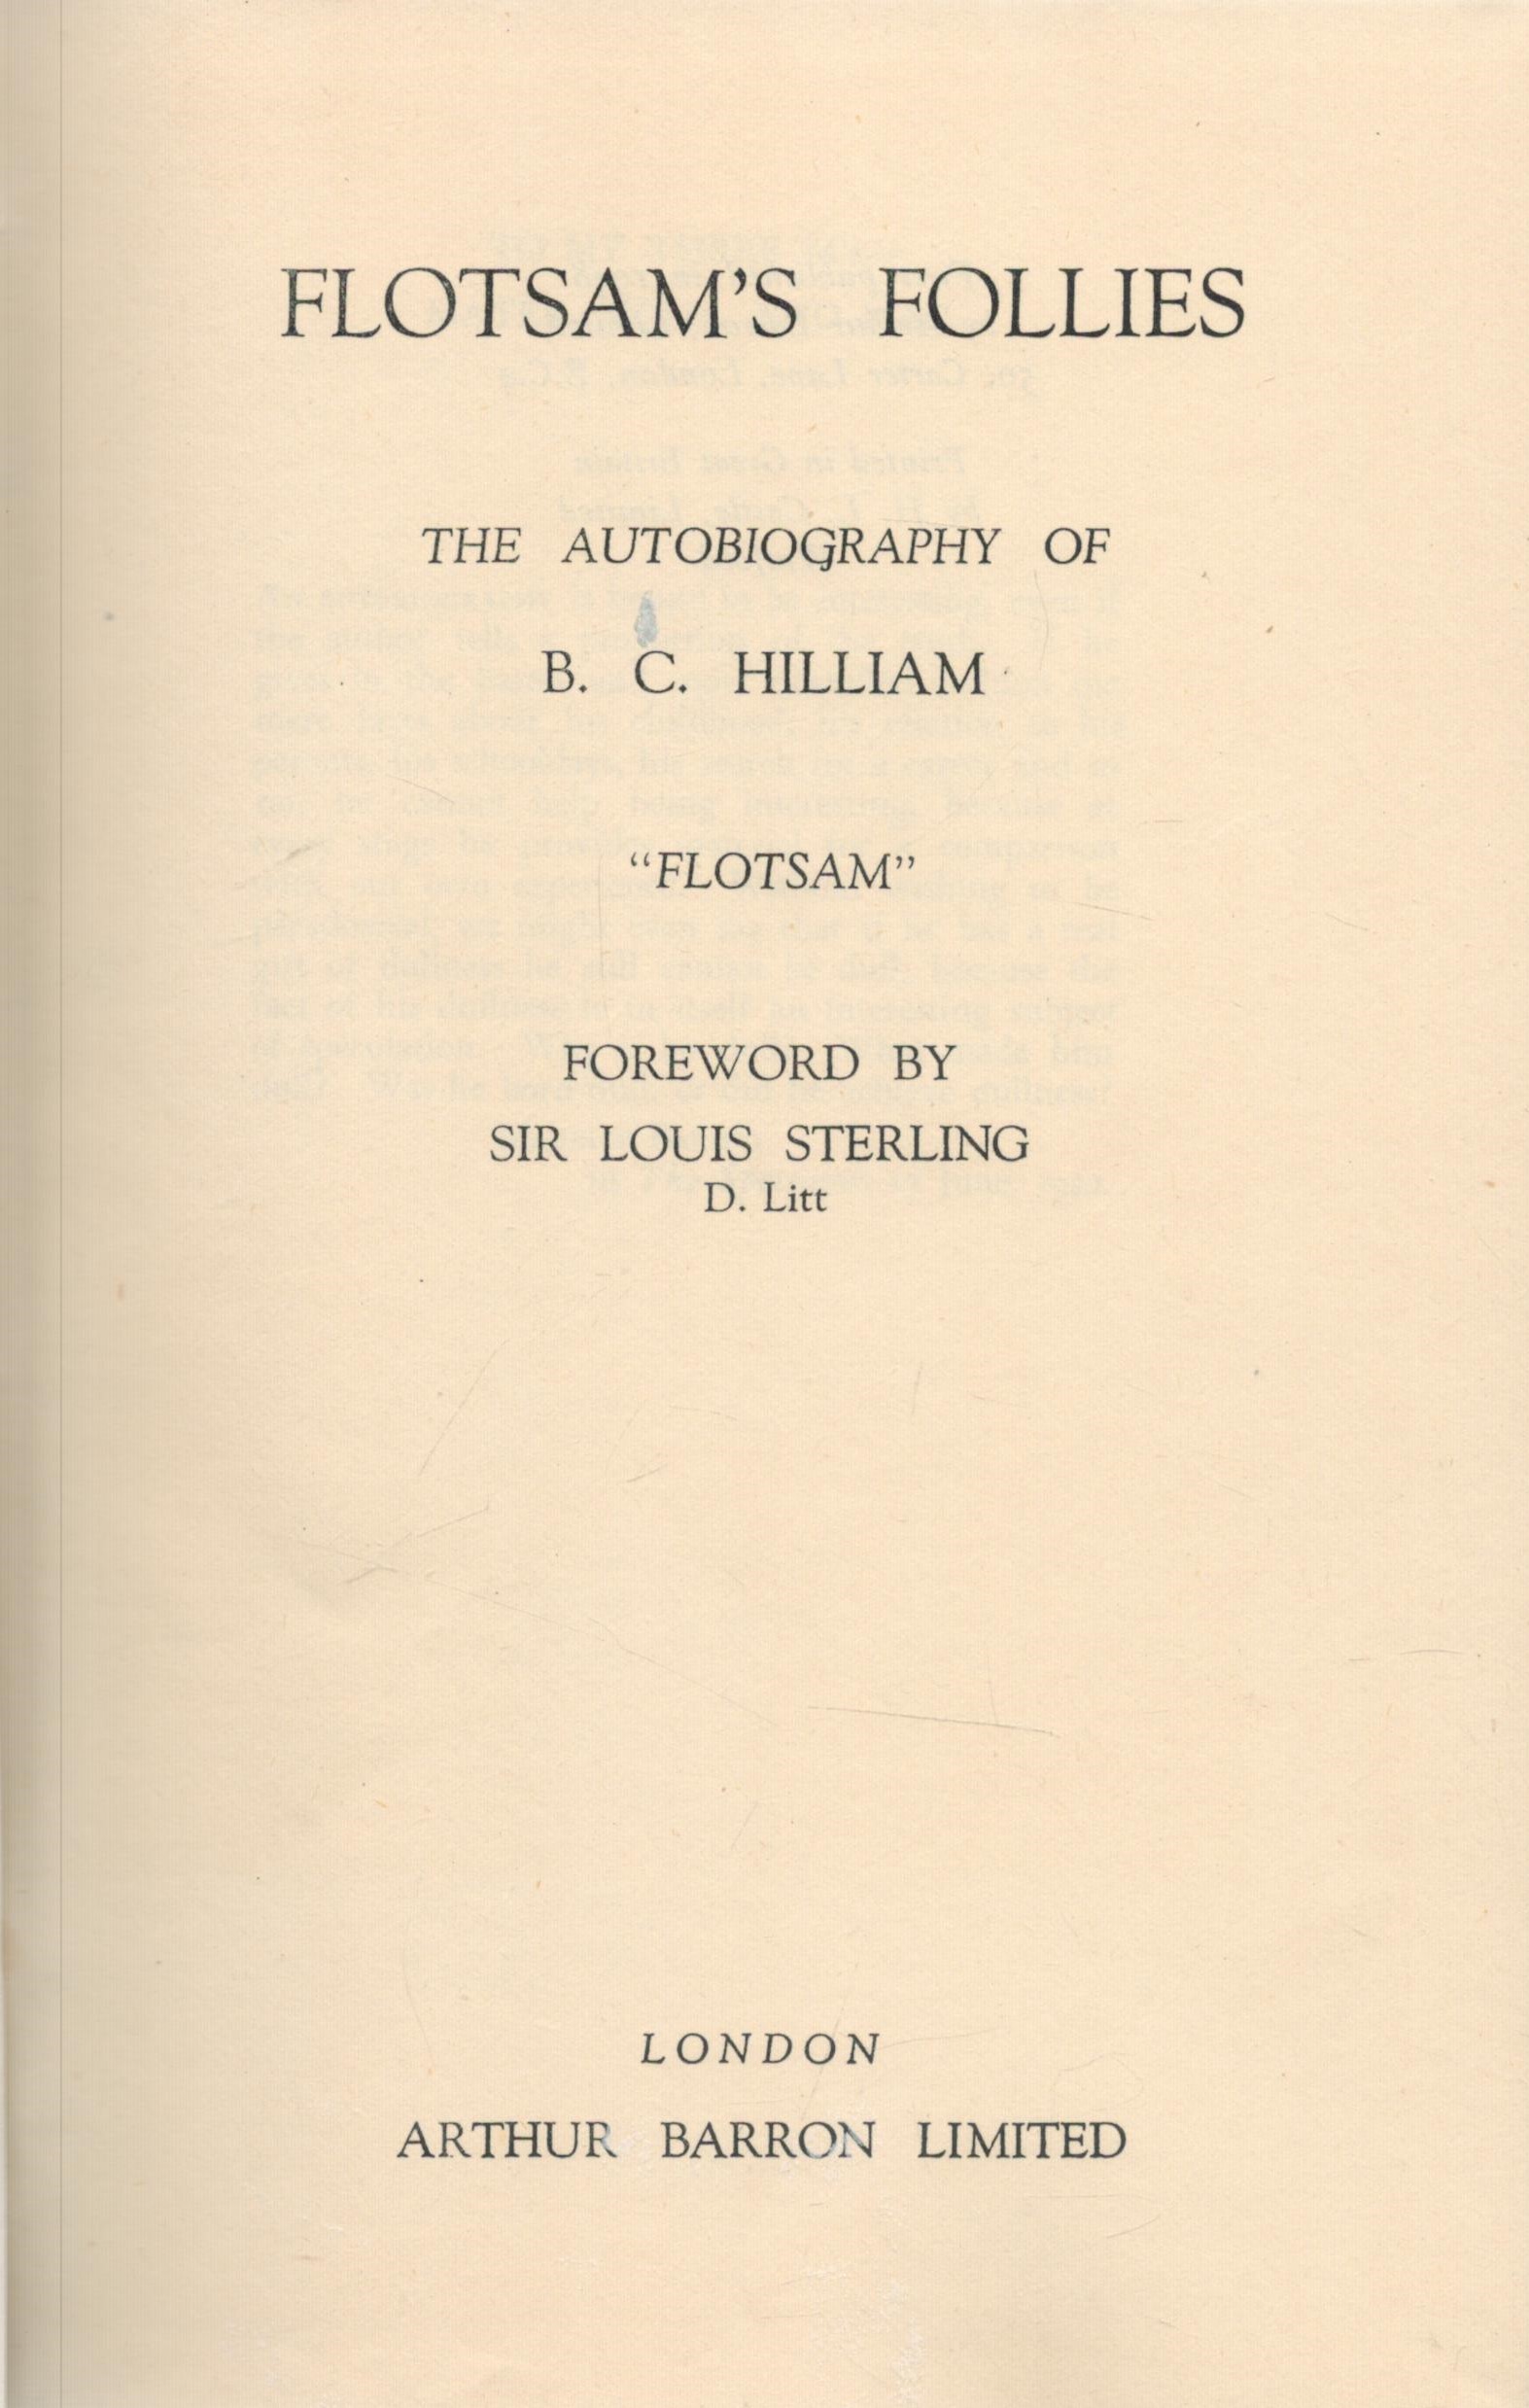 Flotsam's Follies. The Autobiography of B. C. Hilliam. FLOTSAM. Foreword by Sir Louis Sterling. - Image 2 of 3